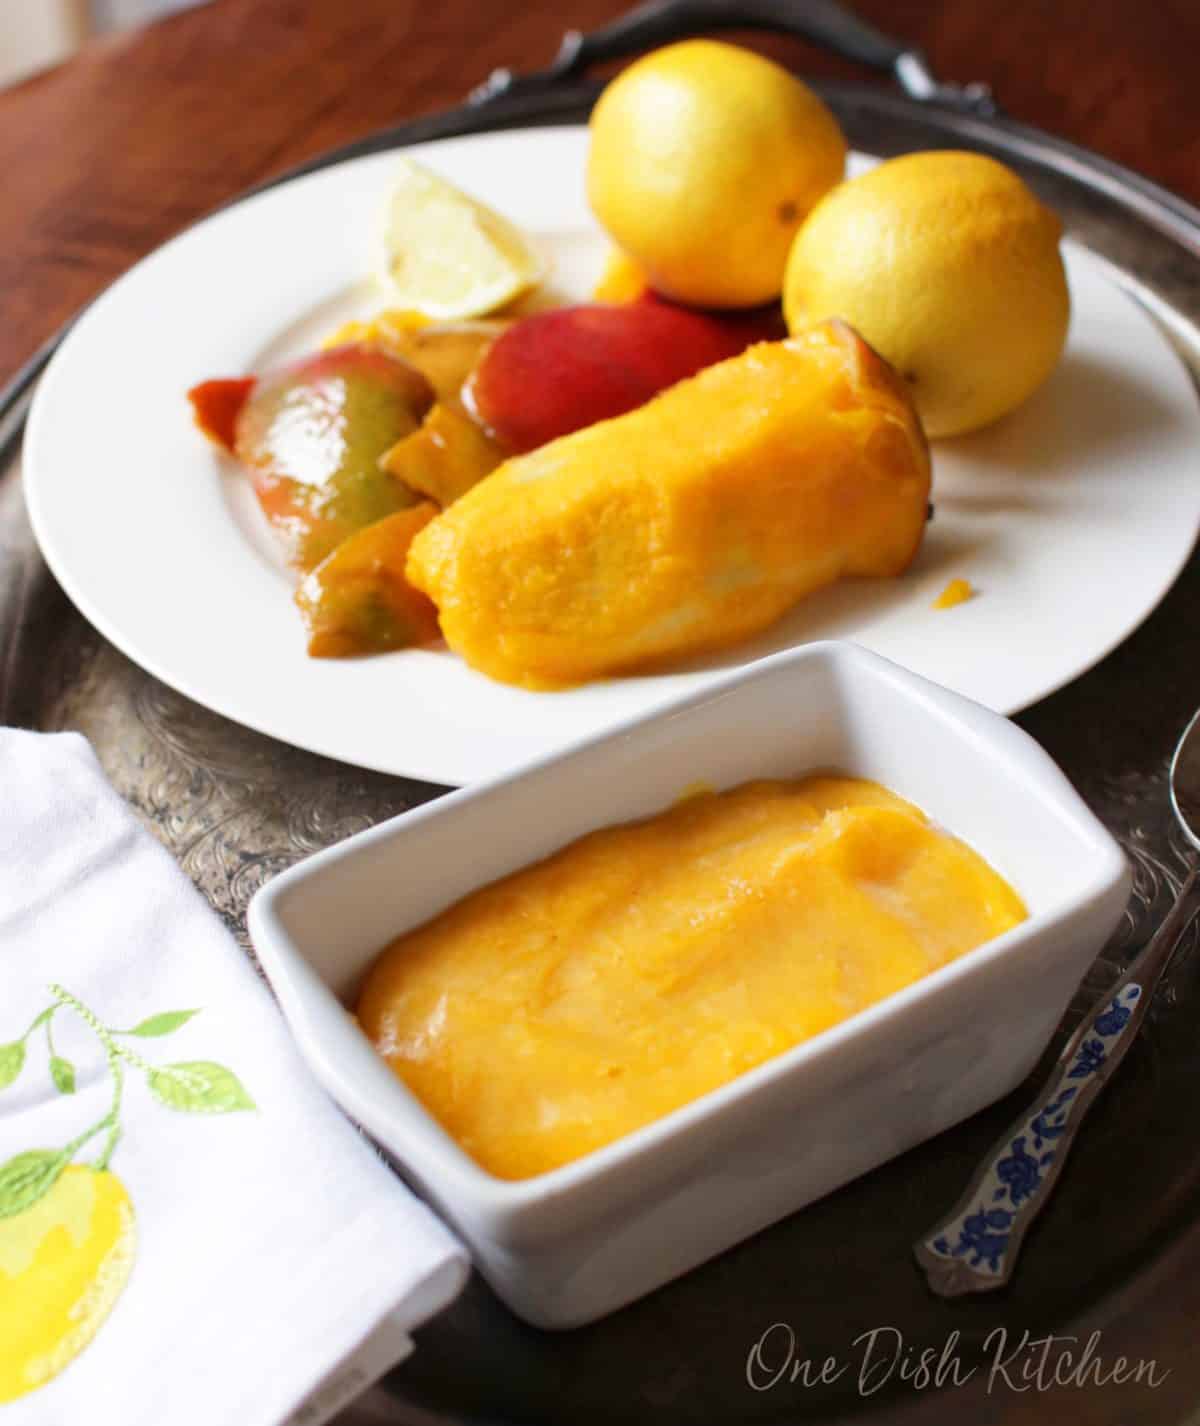 Frozen mango sorbet next to a plate of mango slices and lemons.